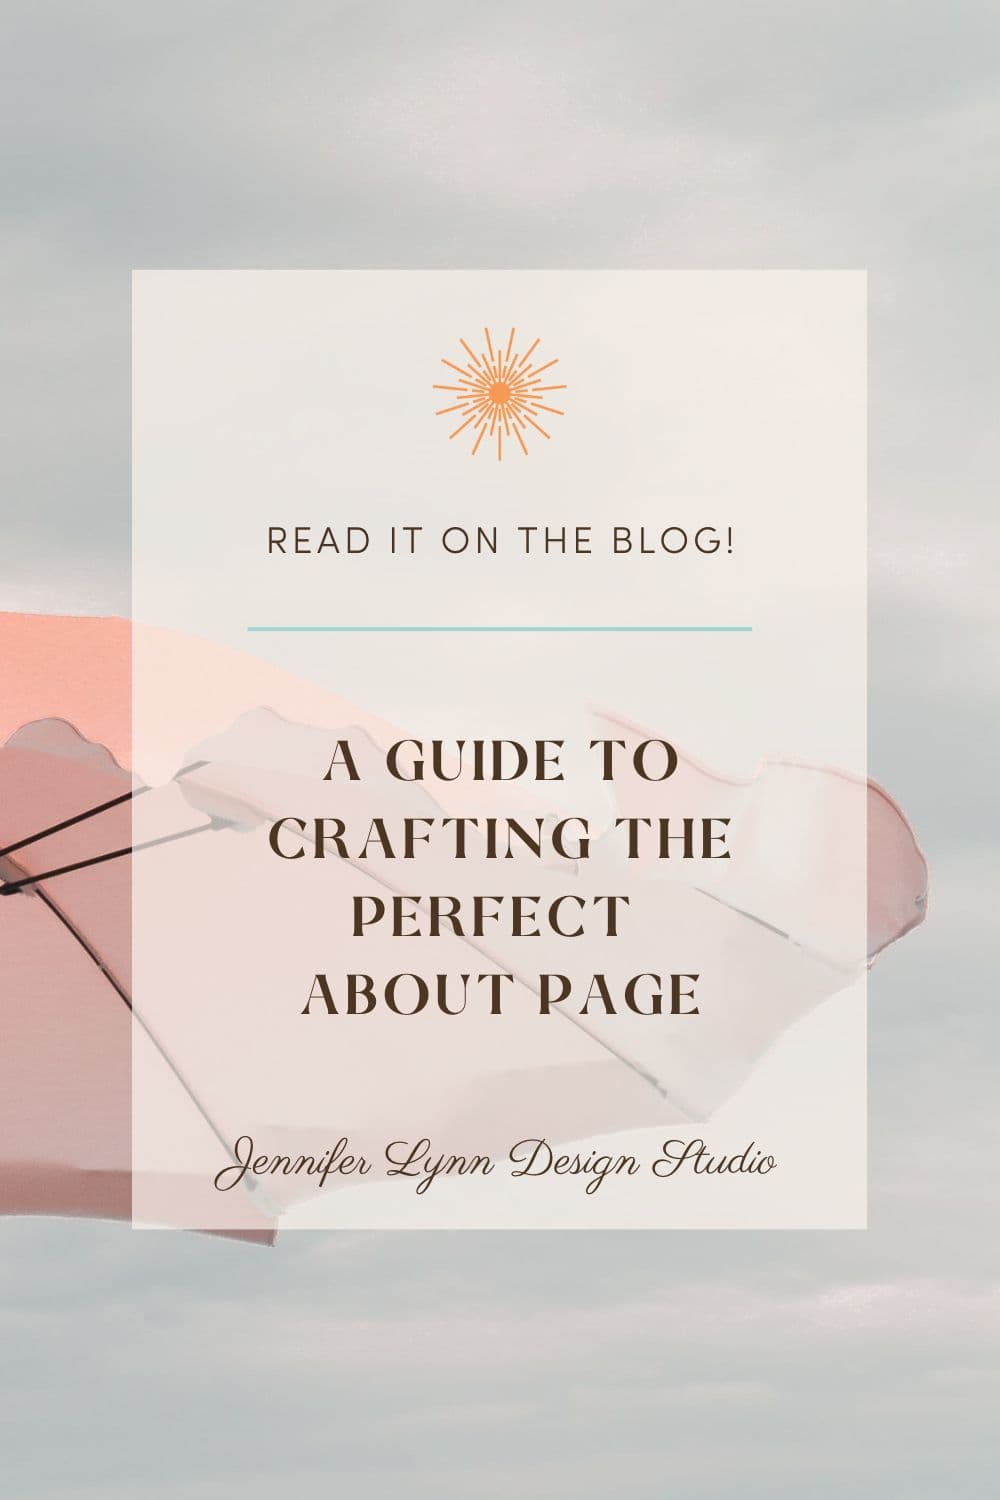 A Guide to Crafting the Perfect About Page by Jennifer Lynn Design Studio